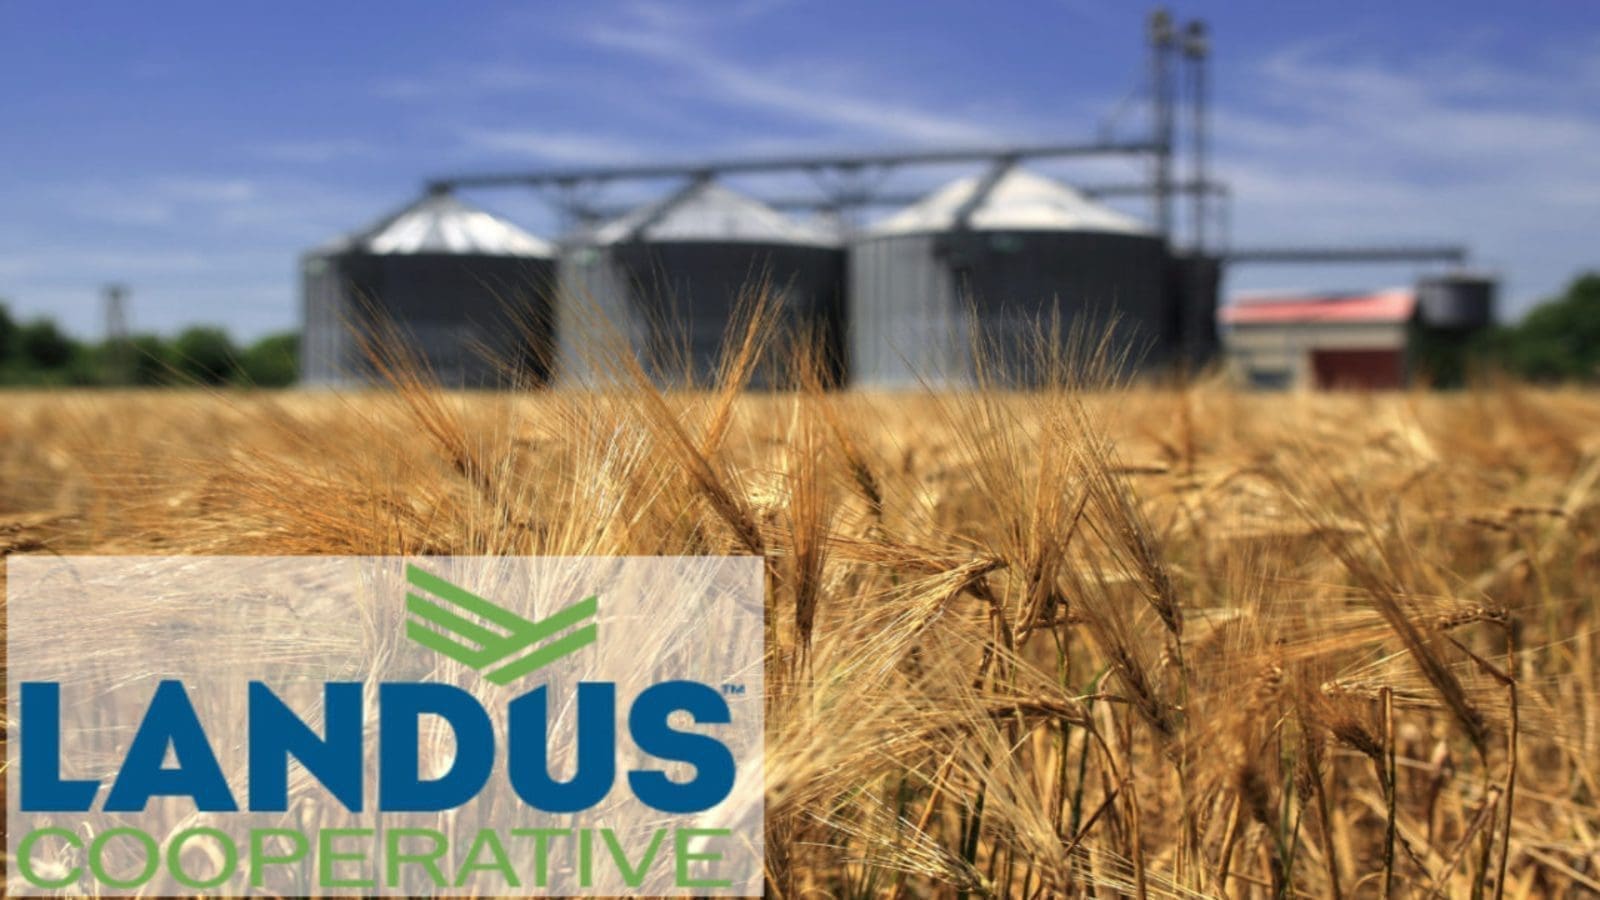 Landus to invest US$150M to modernize grain and agronomy facilities in Iowa